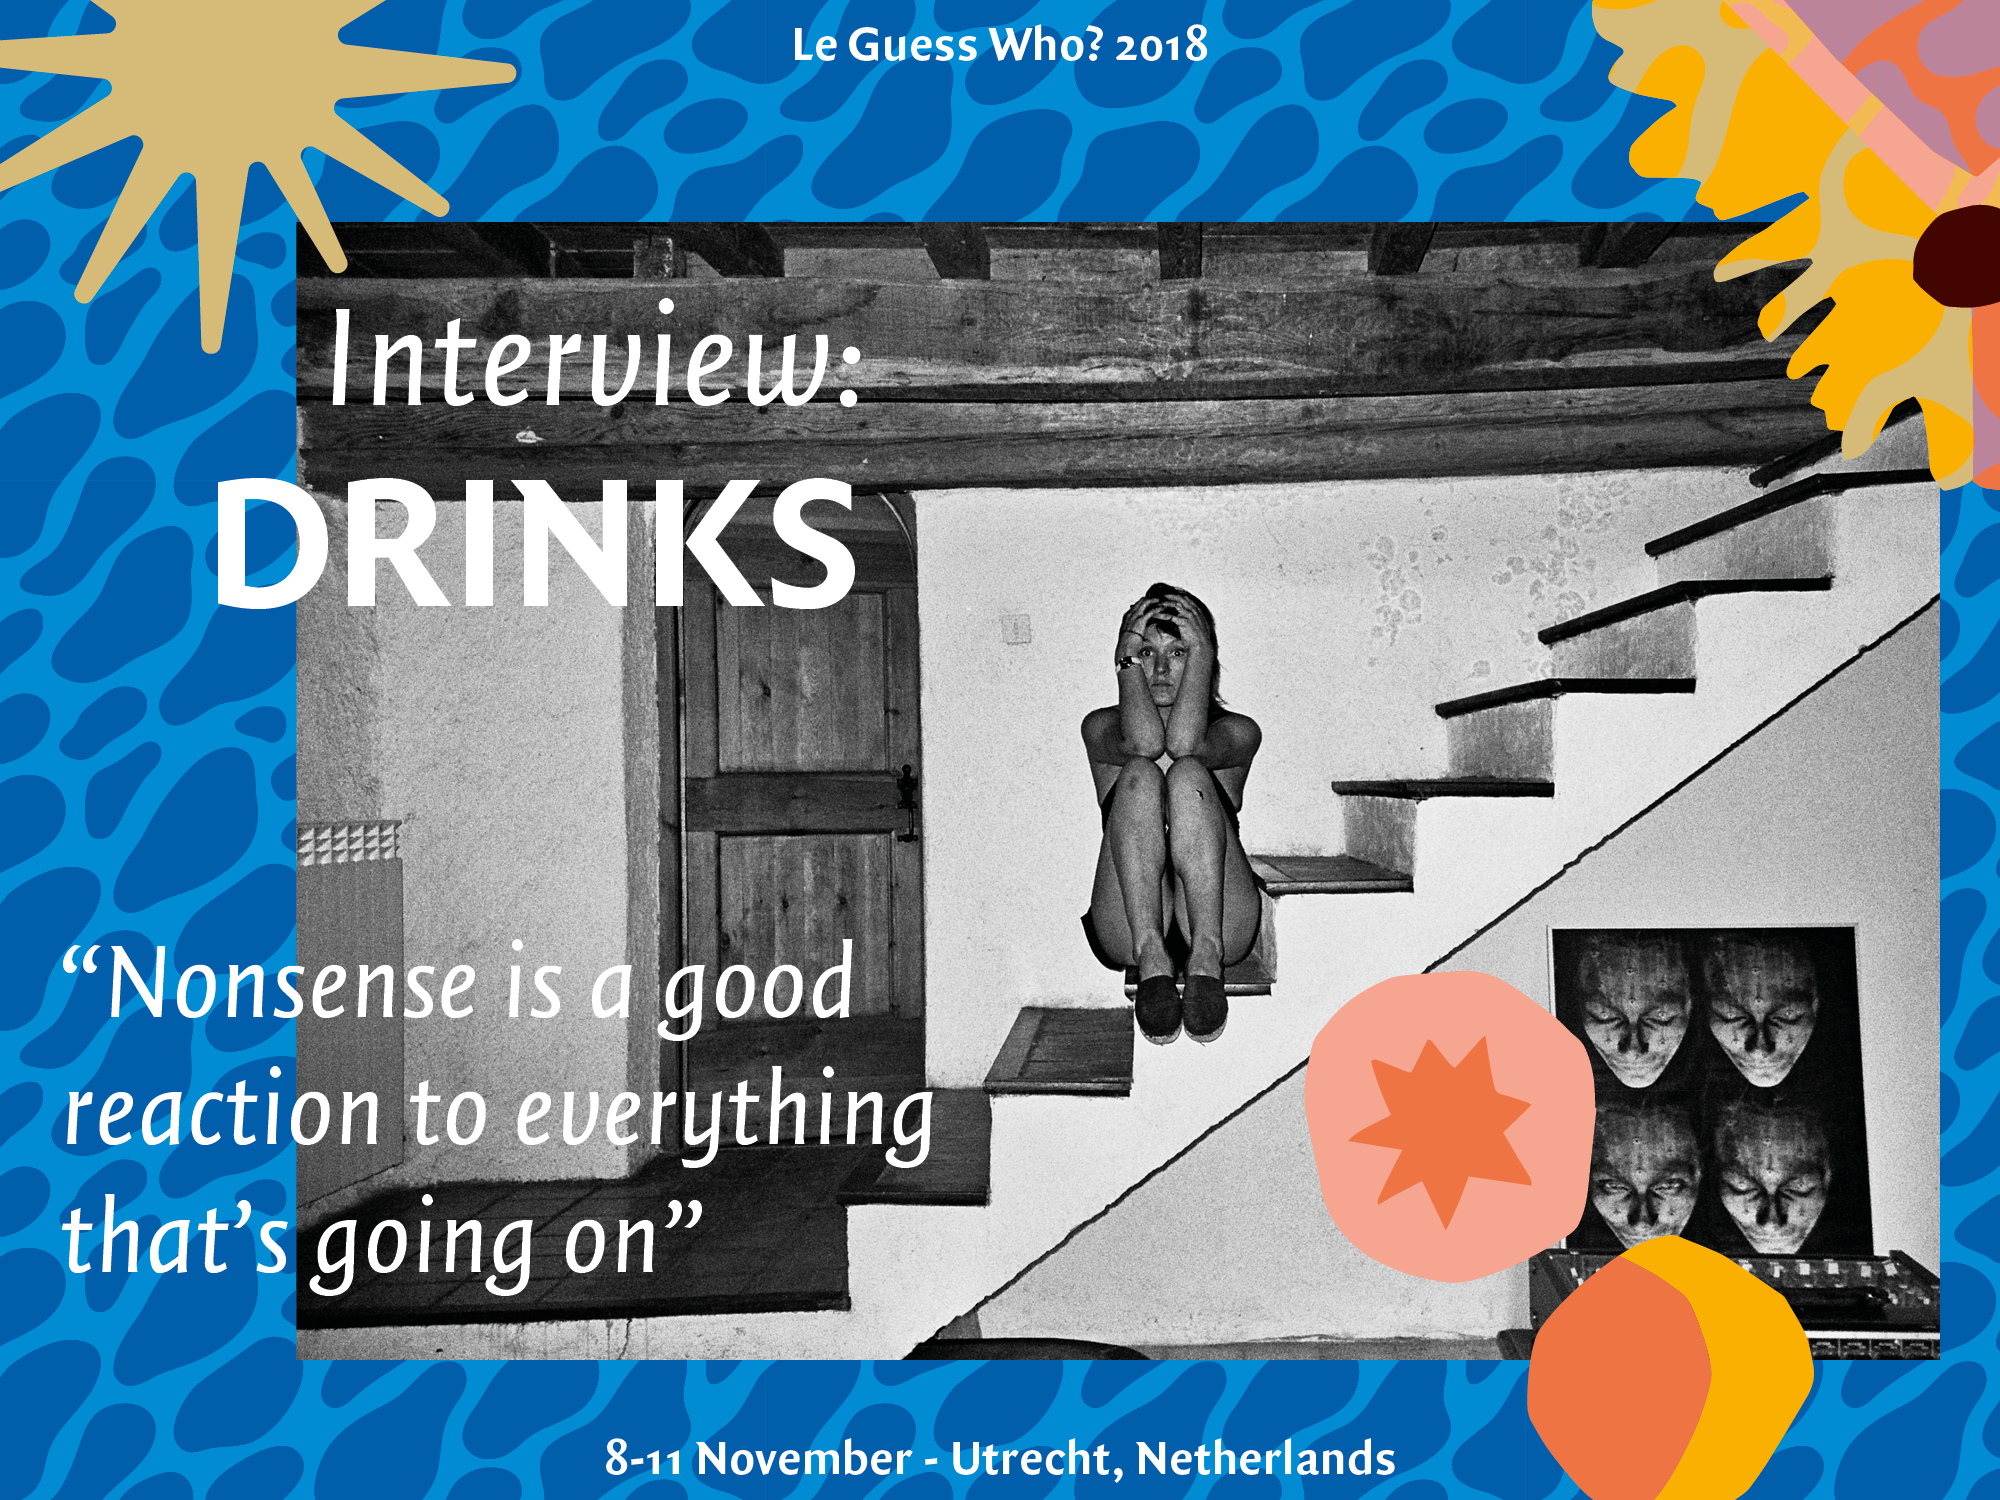 Interview: DRINKS: "Nonsense is a good reaction to everything that’s going on"